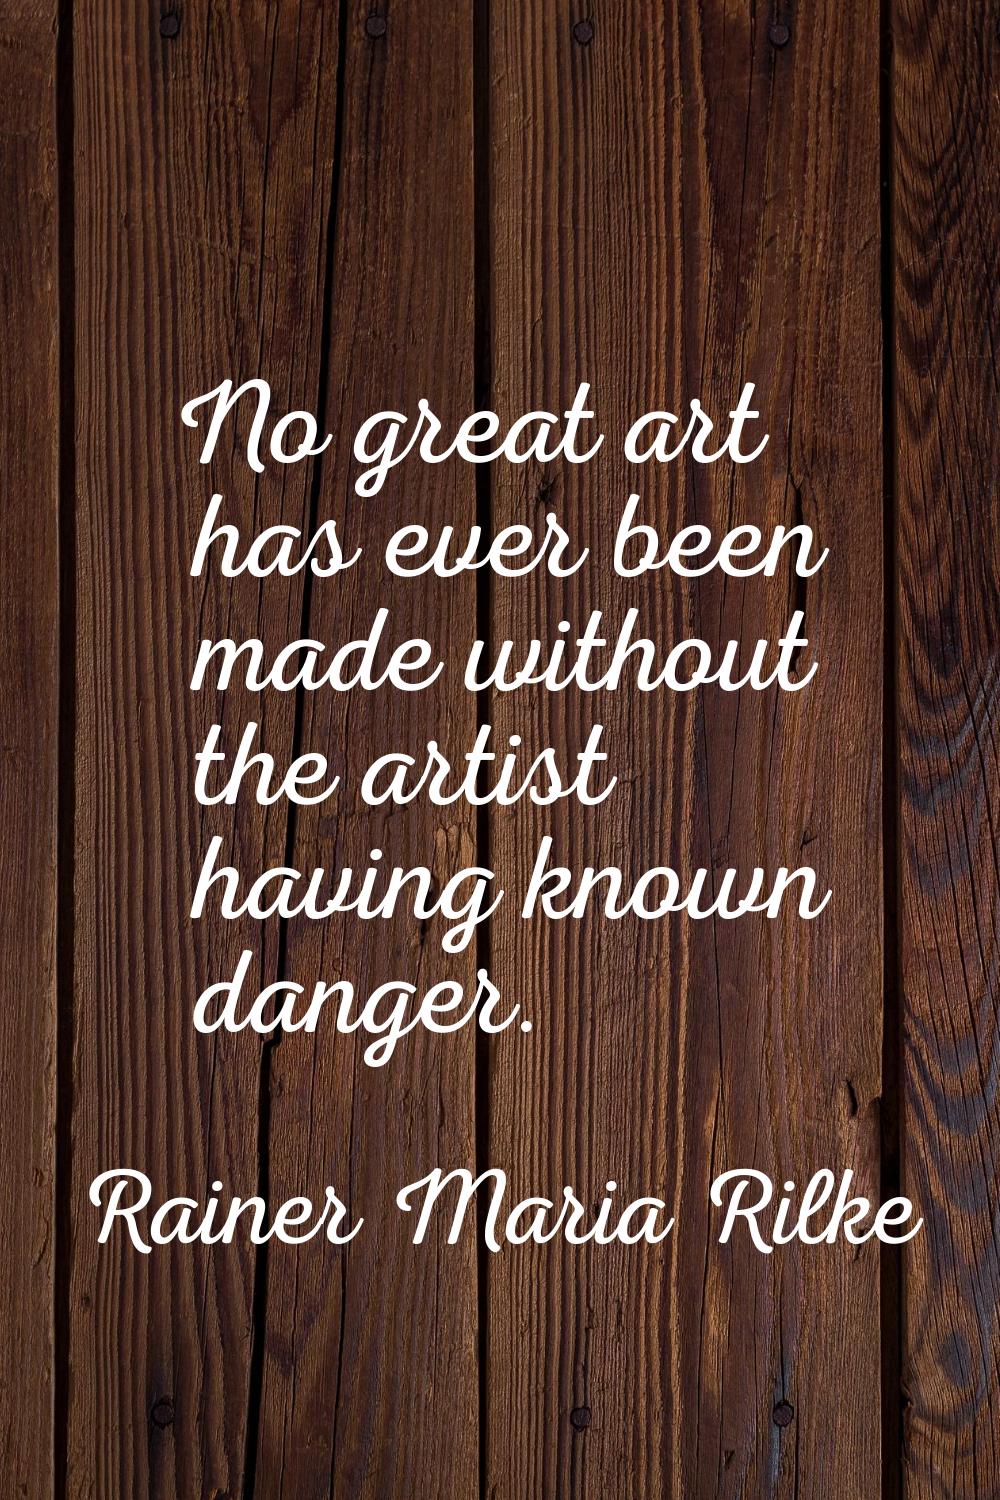 No great art has ever been made without the artist having known danger.